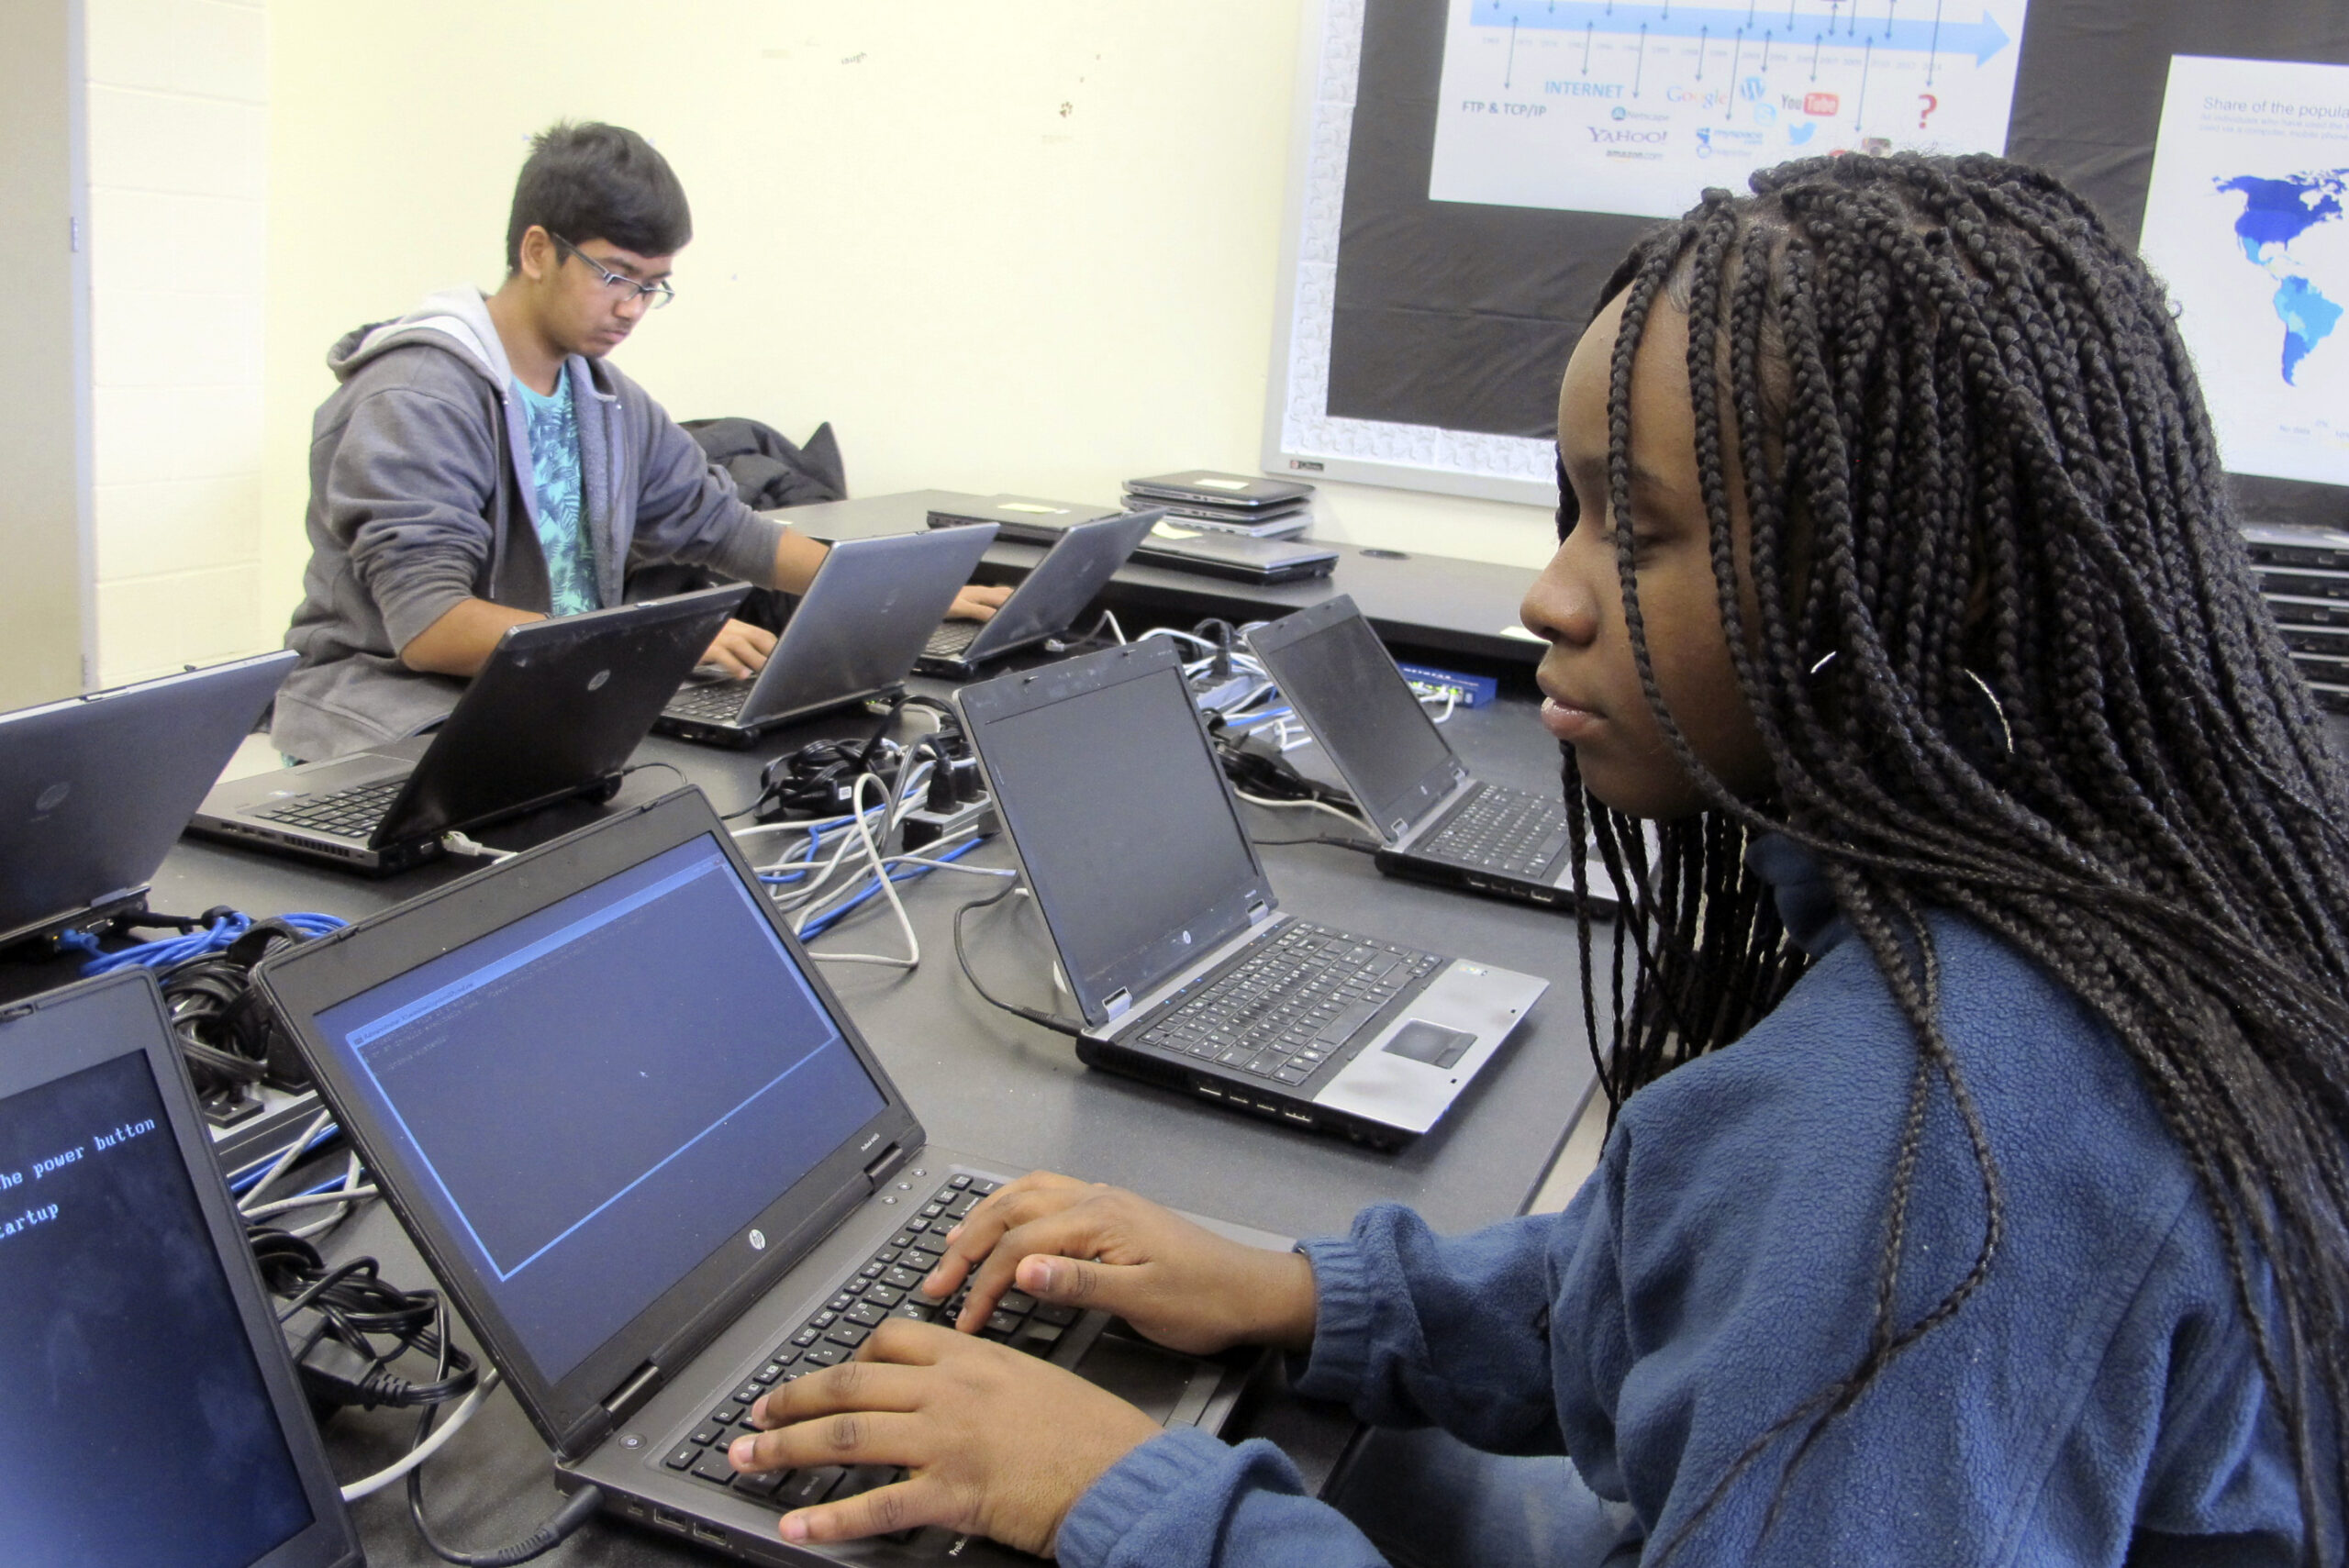 students work on re-imaging laptops in a school computer lab